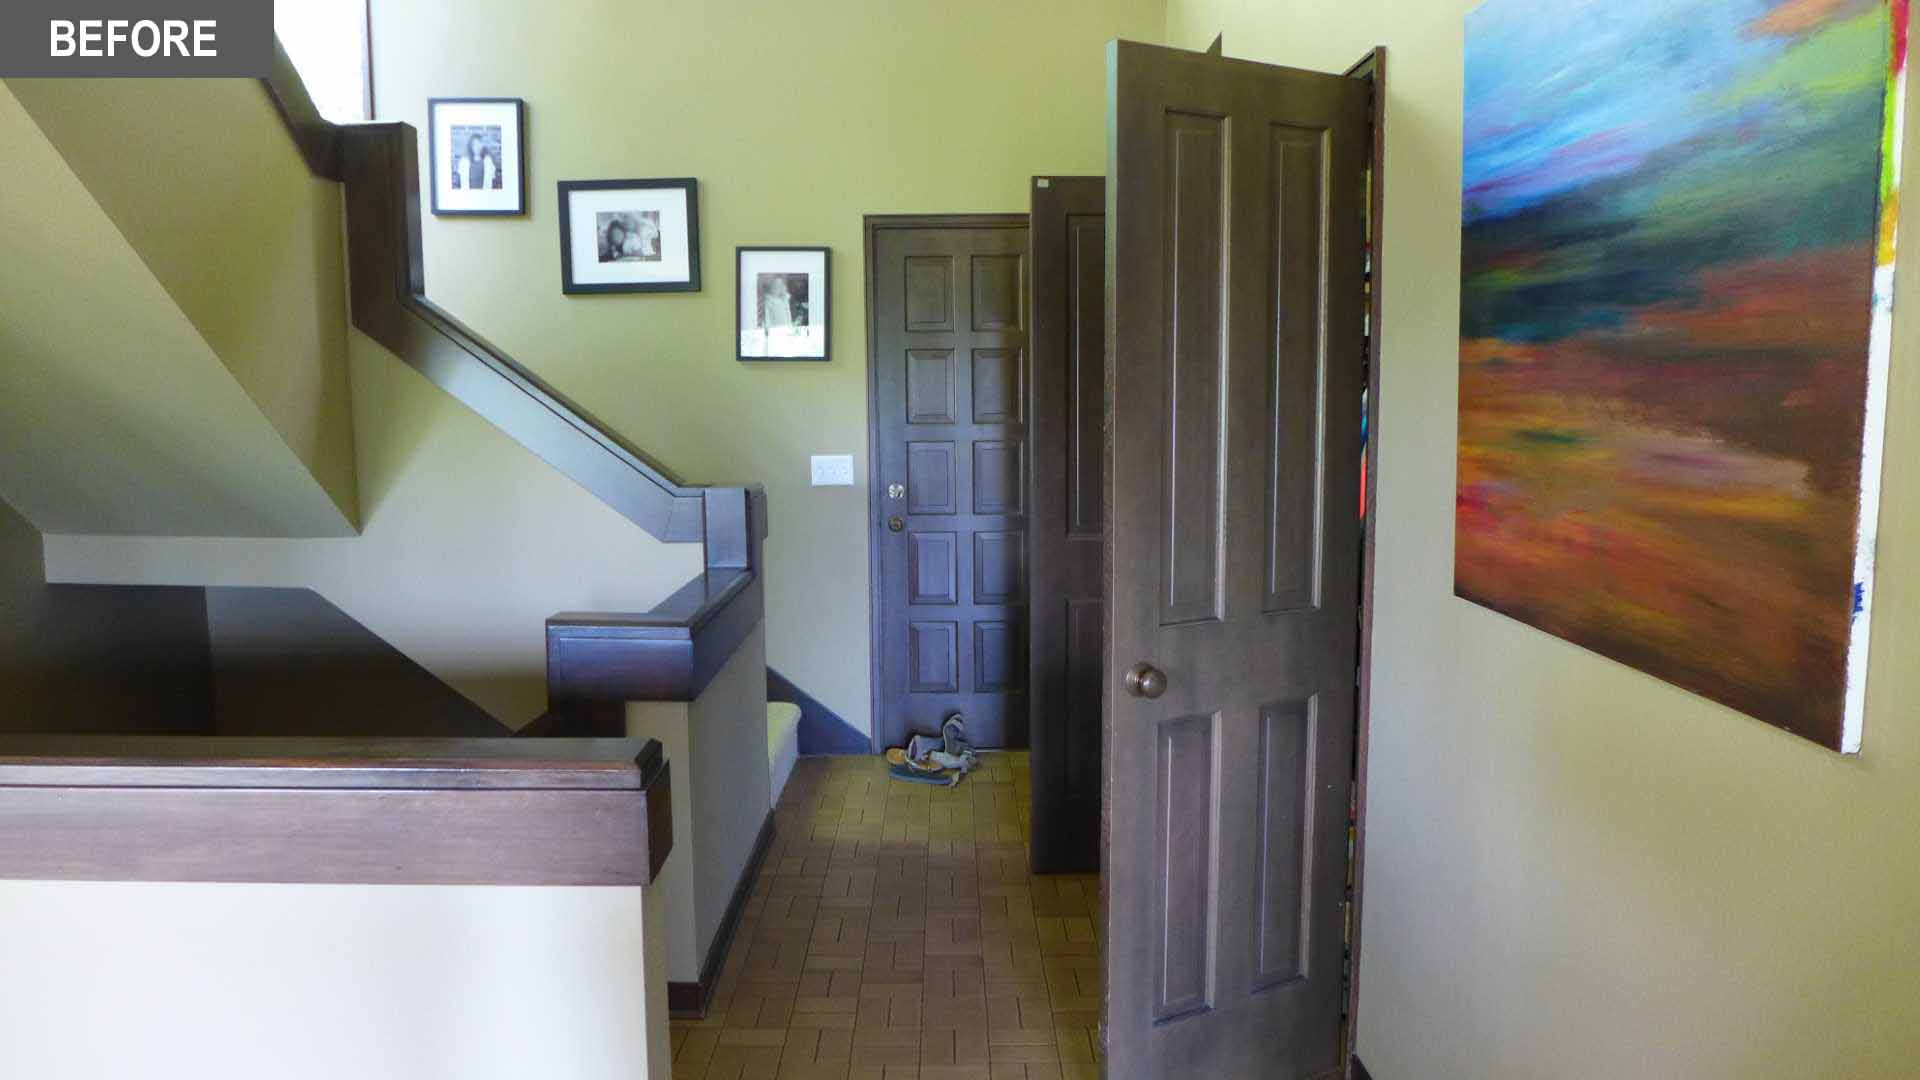 BEFORE REMODEL - The original stairs featured green walls and dark wood accents.